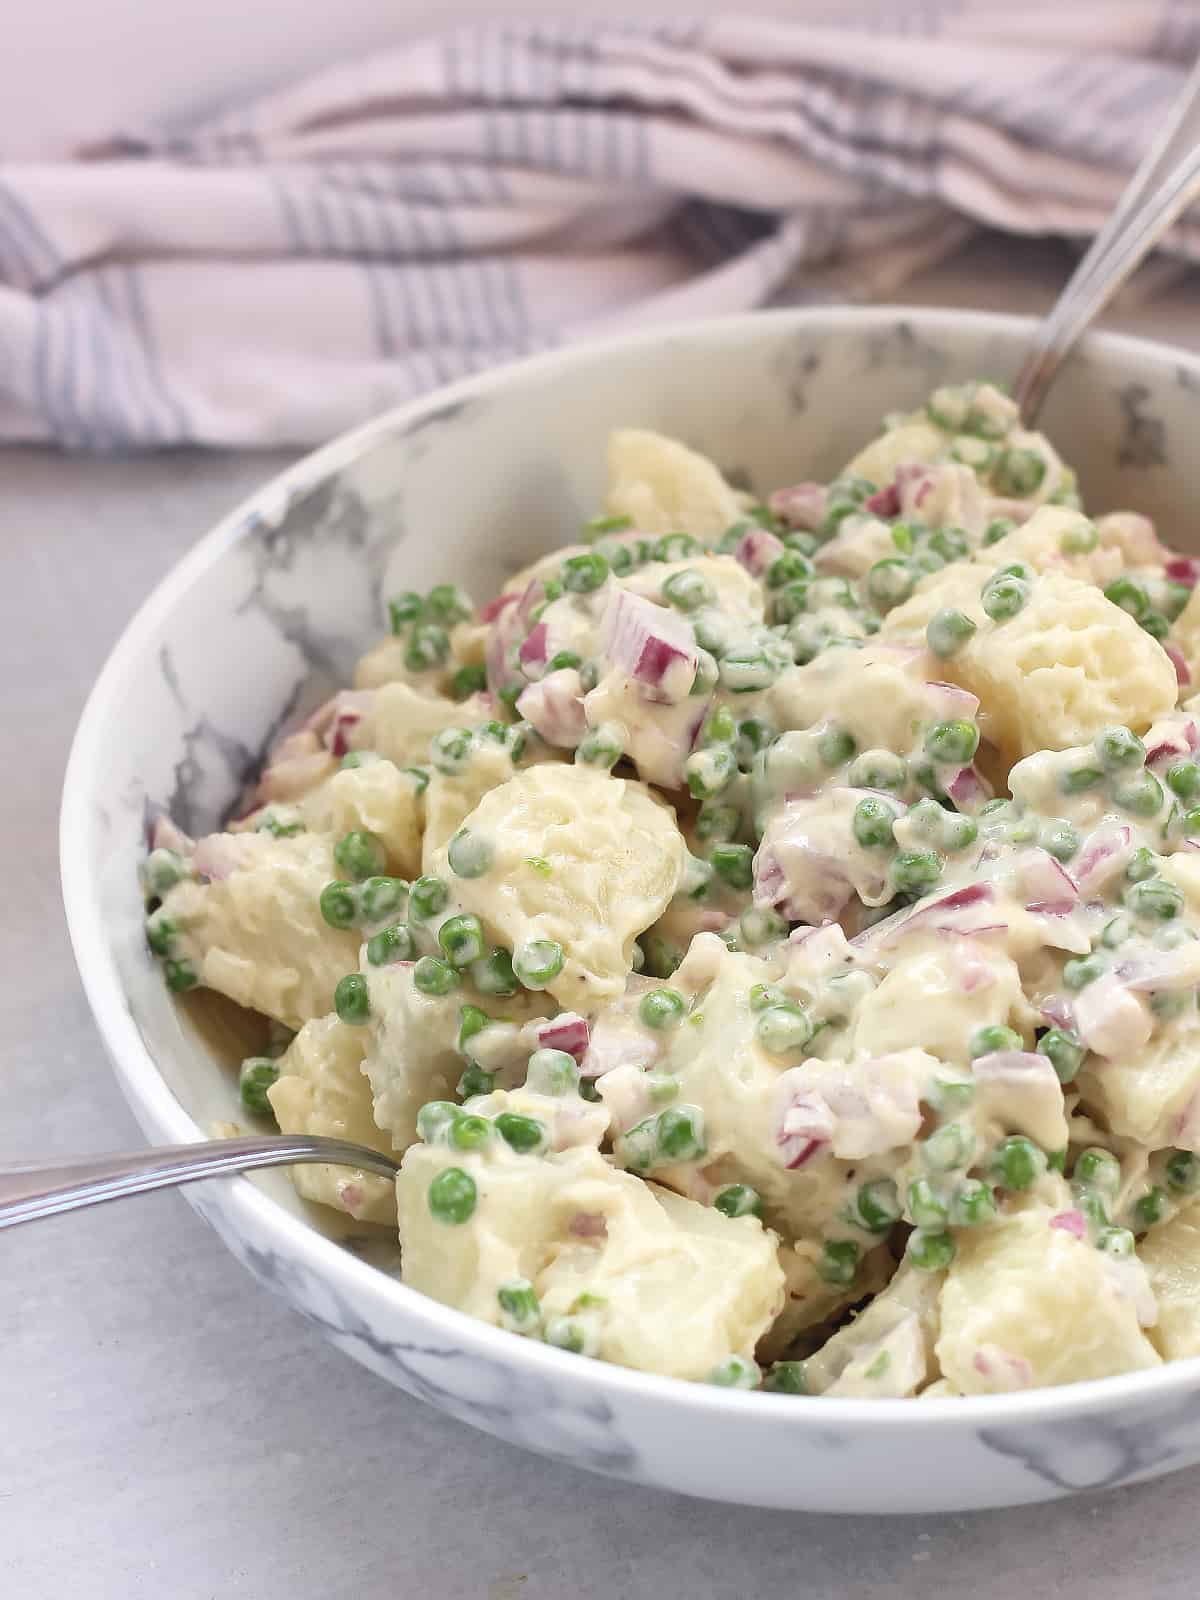 PEas mixed in with a creamy potato salad.